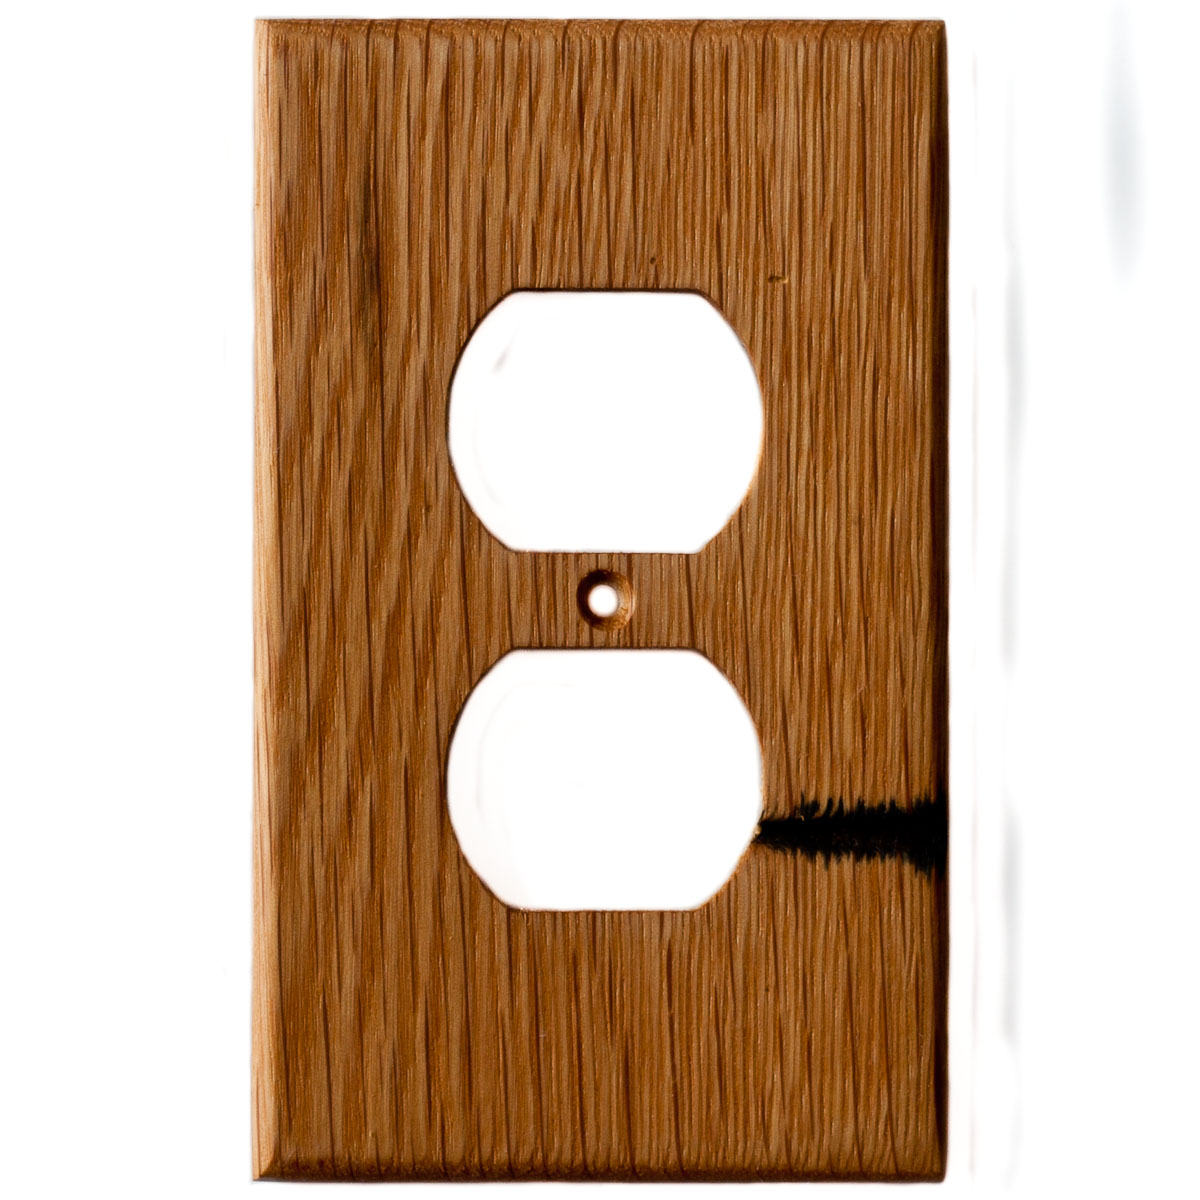 Antique Oak Reclaimed Wood Light Switch Covers and Outlet Covers